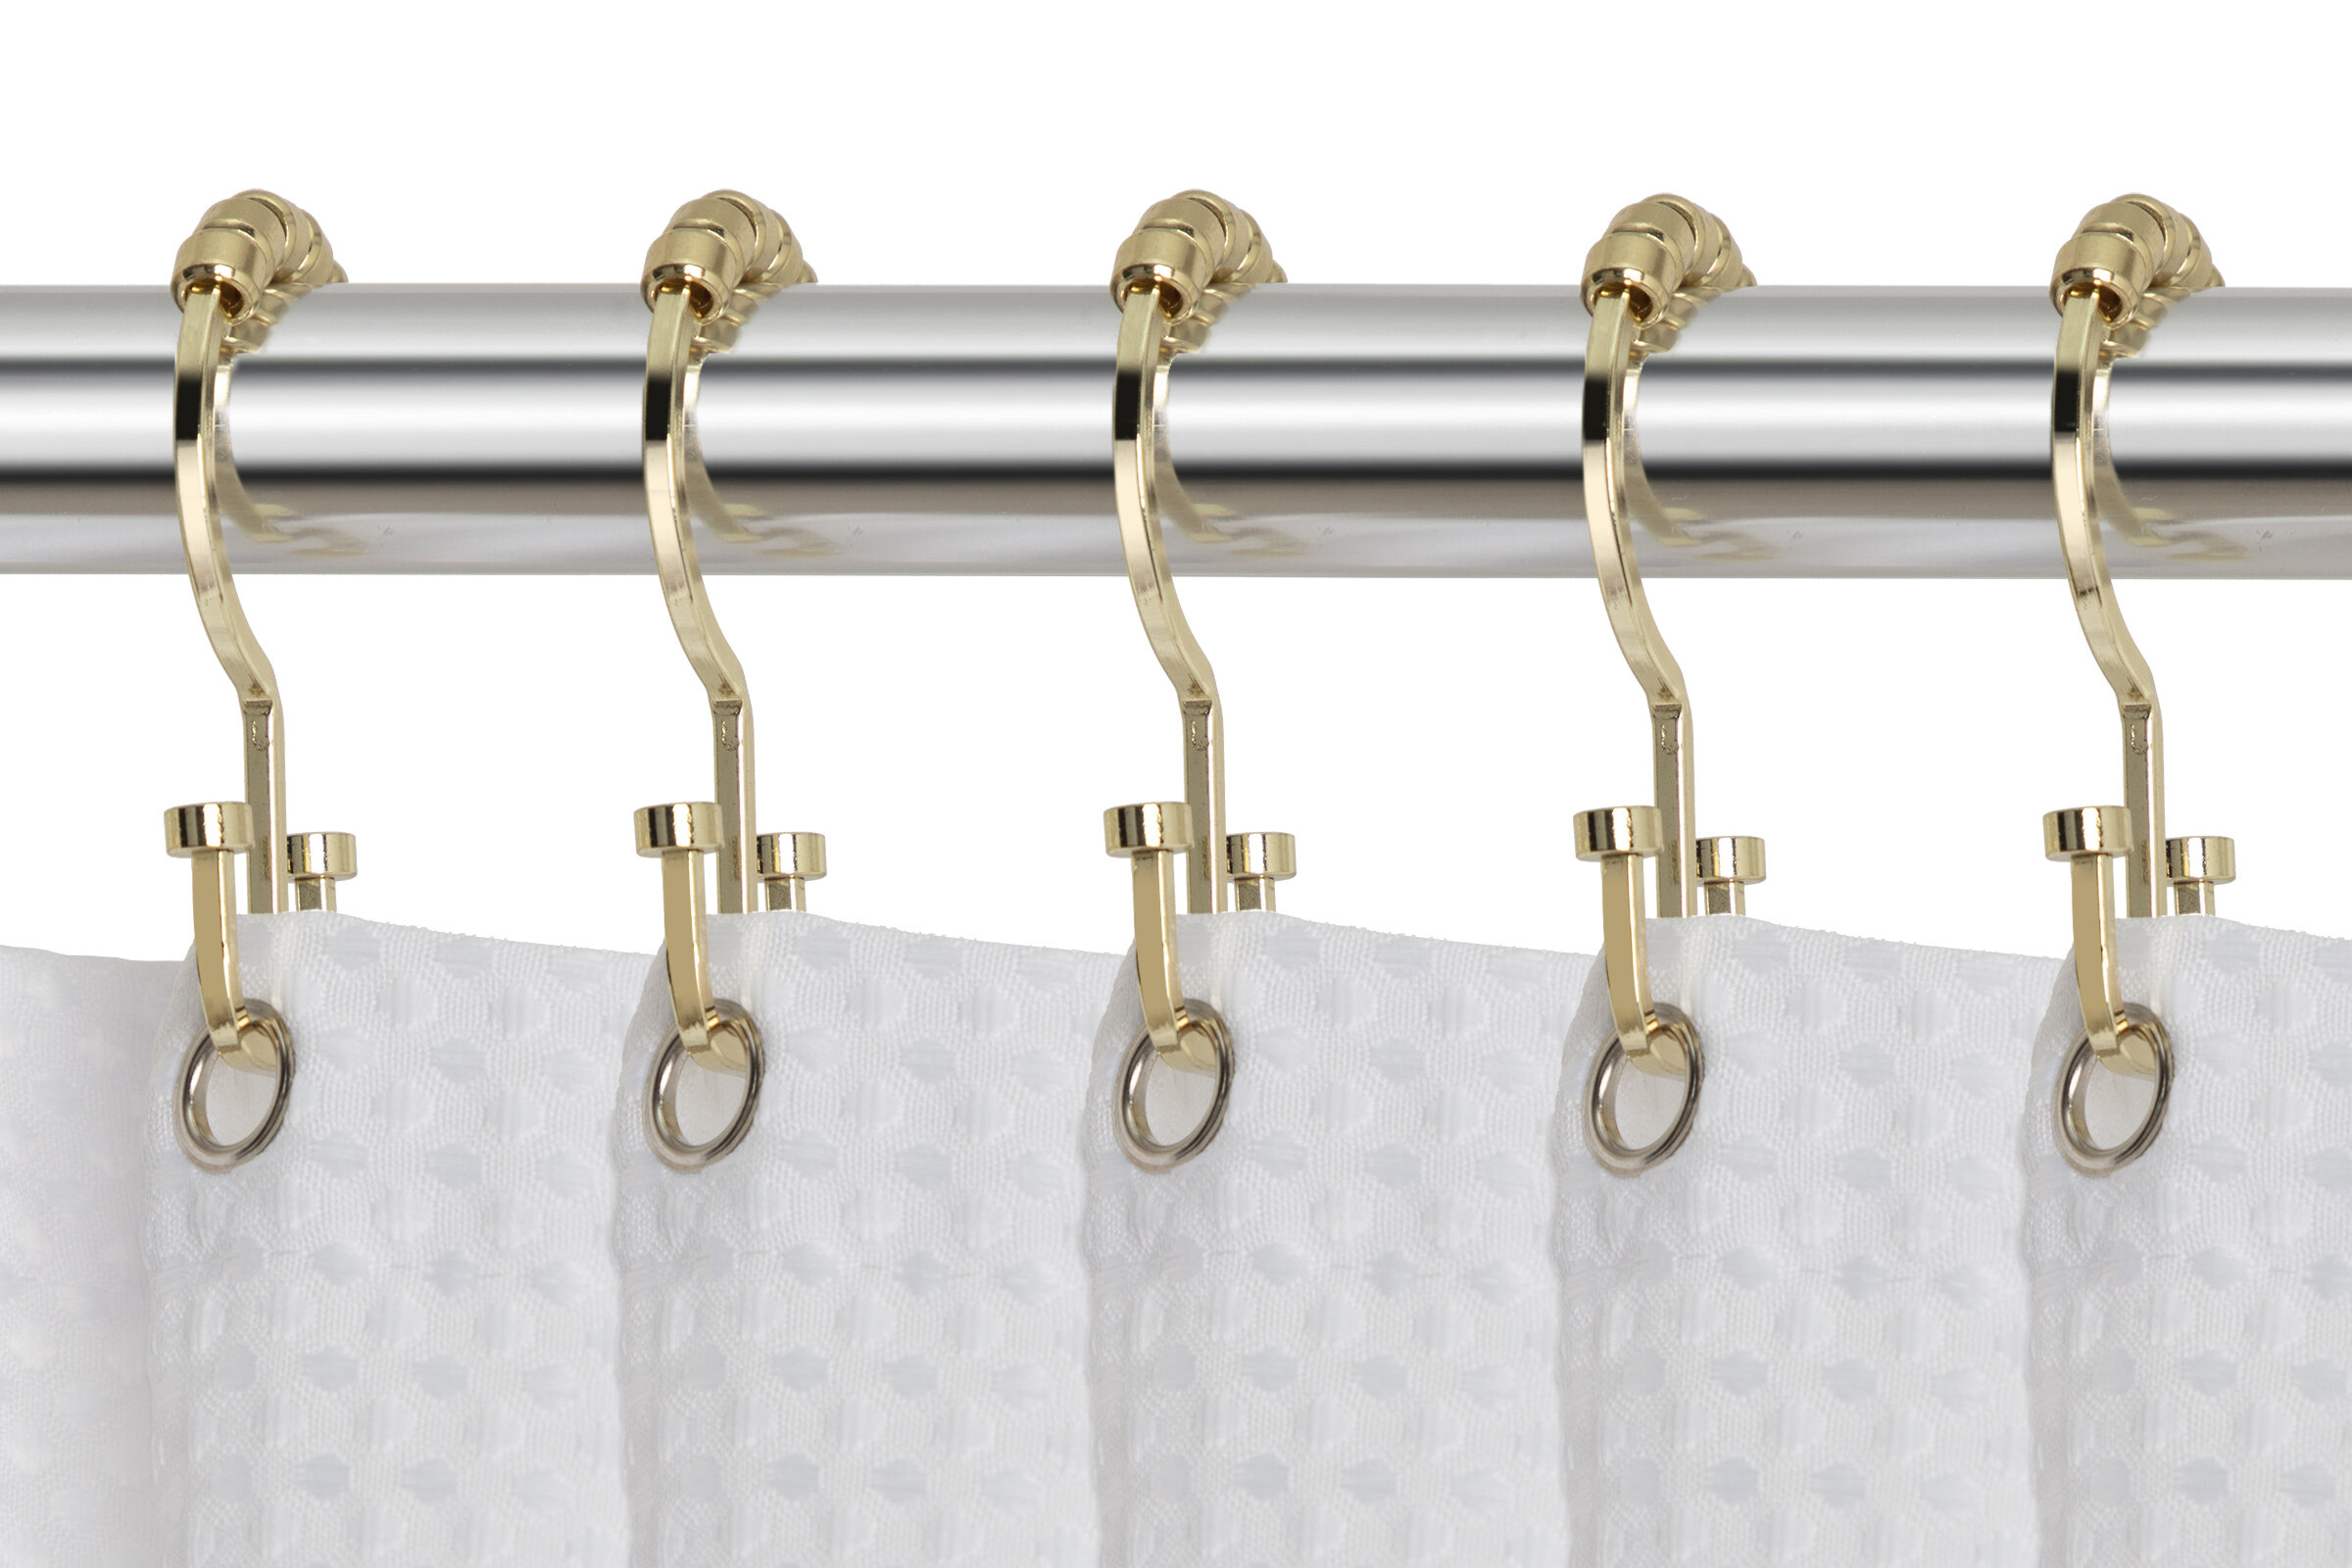 12pcs Chrome-Plated Shower Curtain Hooks, Bathroom Rust-Resistant Shower  Curtain Rings, Metal Shower Hooks For Shower Curtain Rod, Modern Decorative Shower  Curtain Hangers With Round Heavy-Duty Design